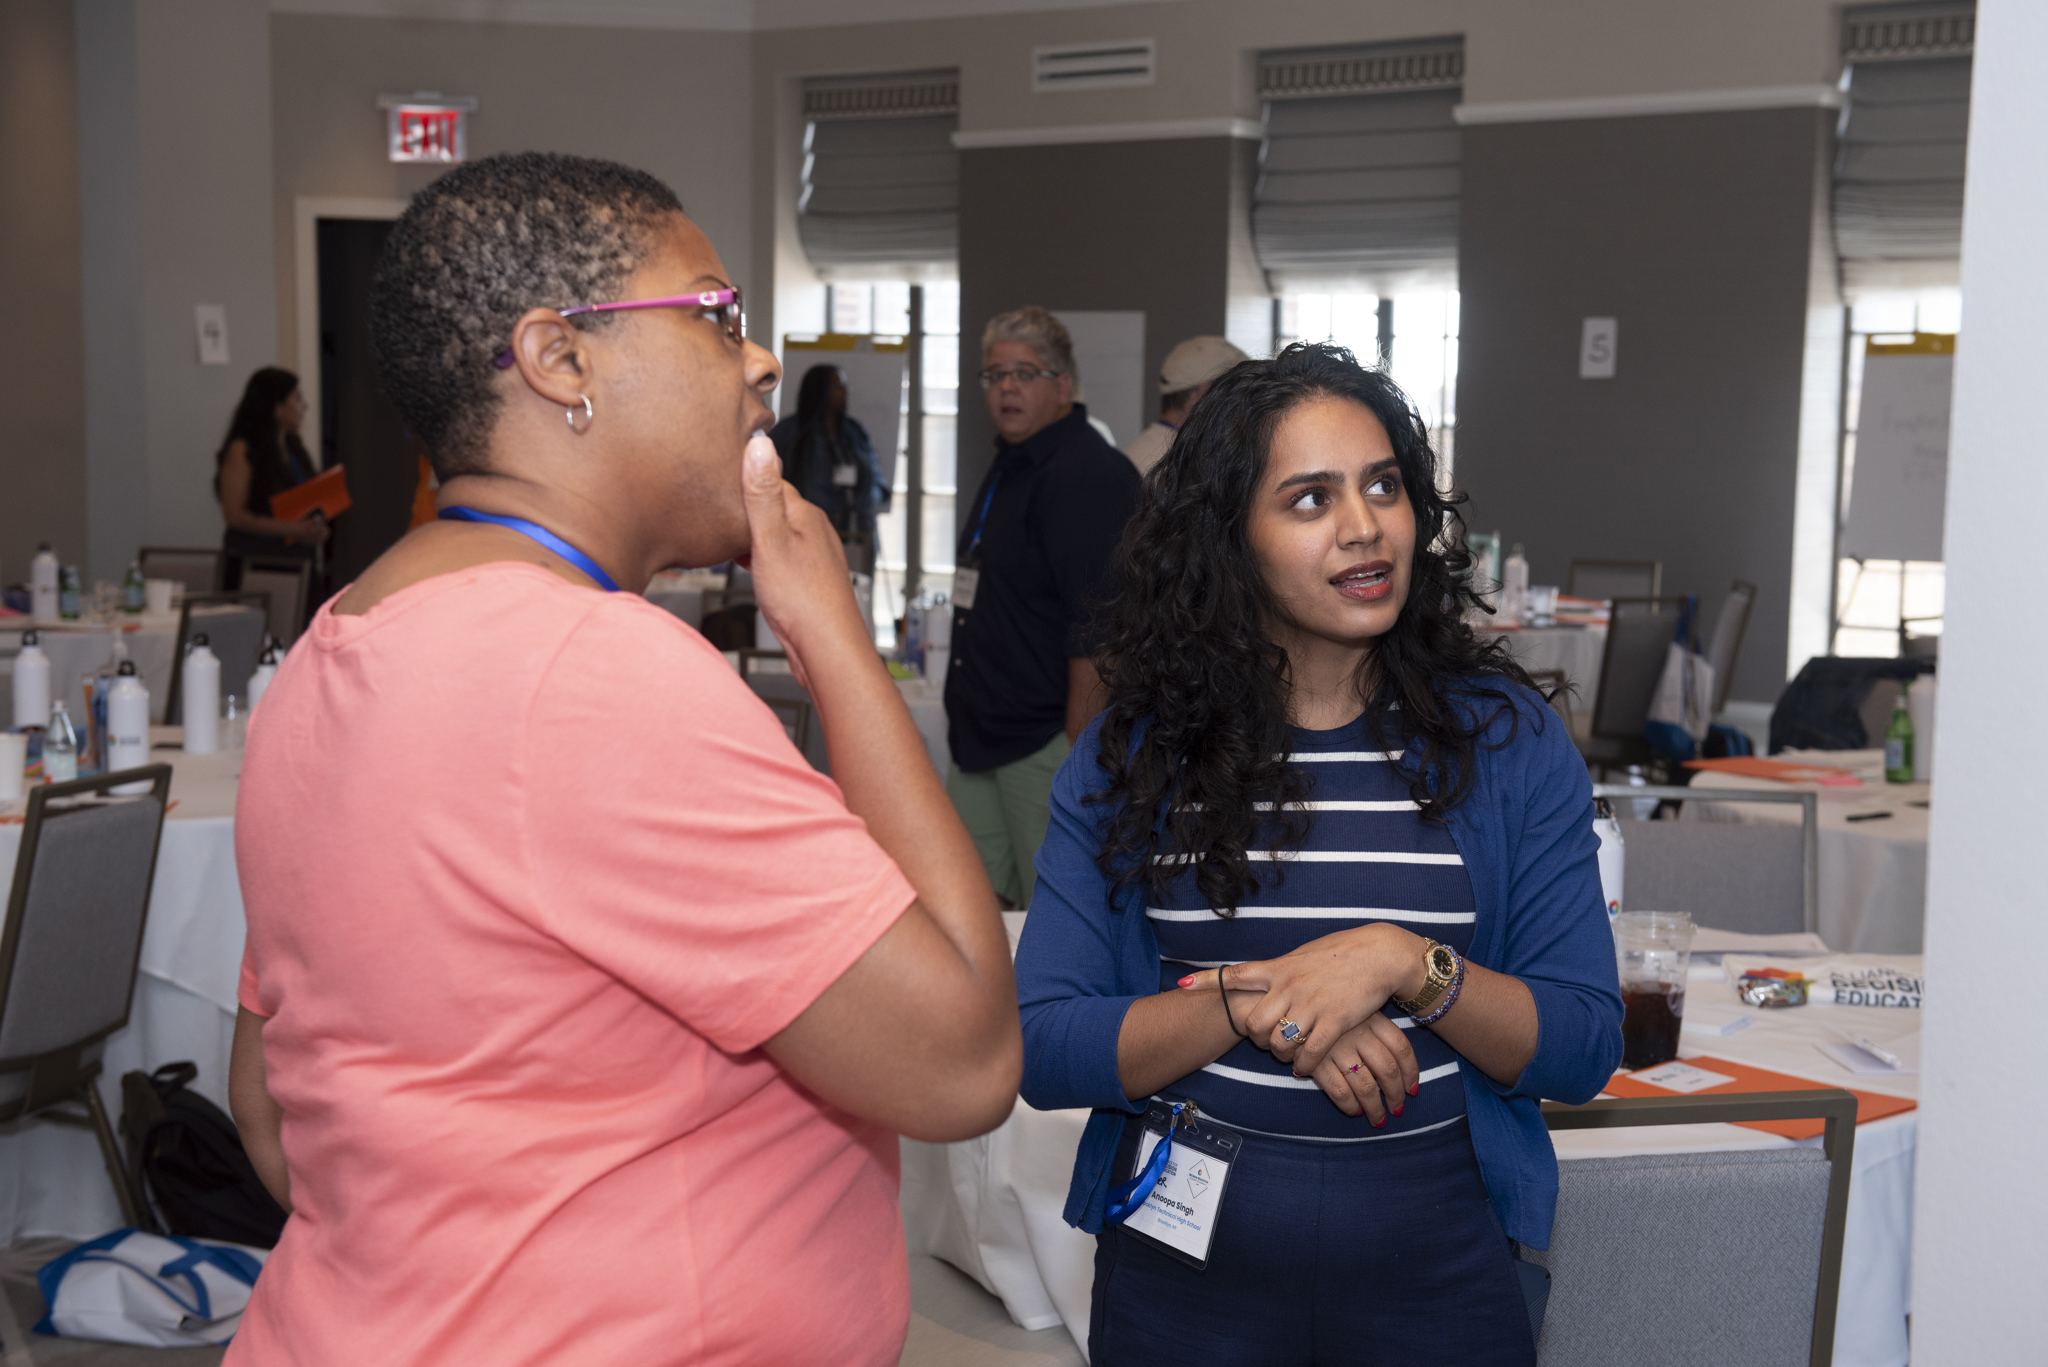 Teachers engage in a discussion during an event.